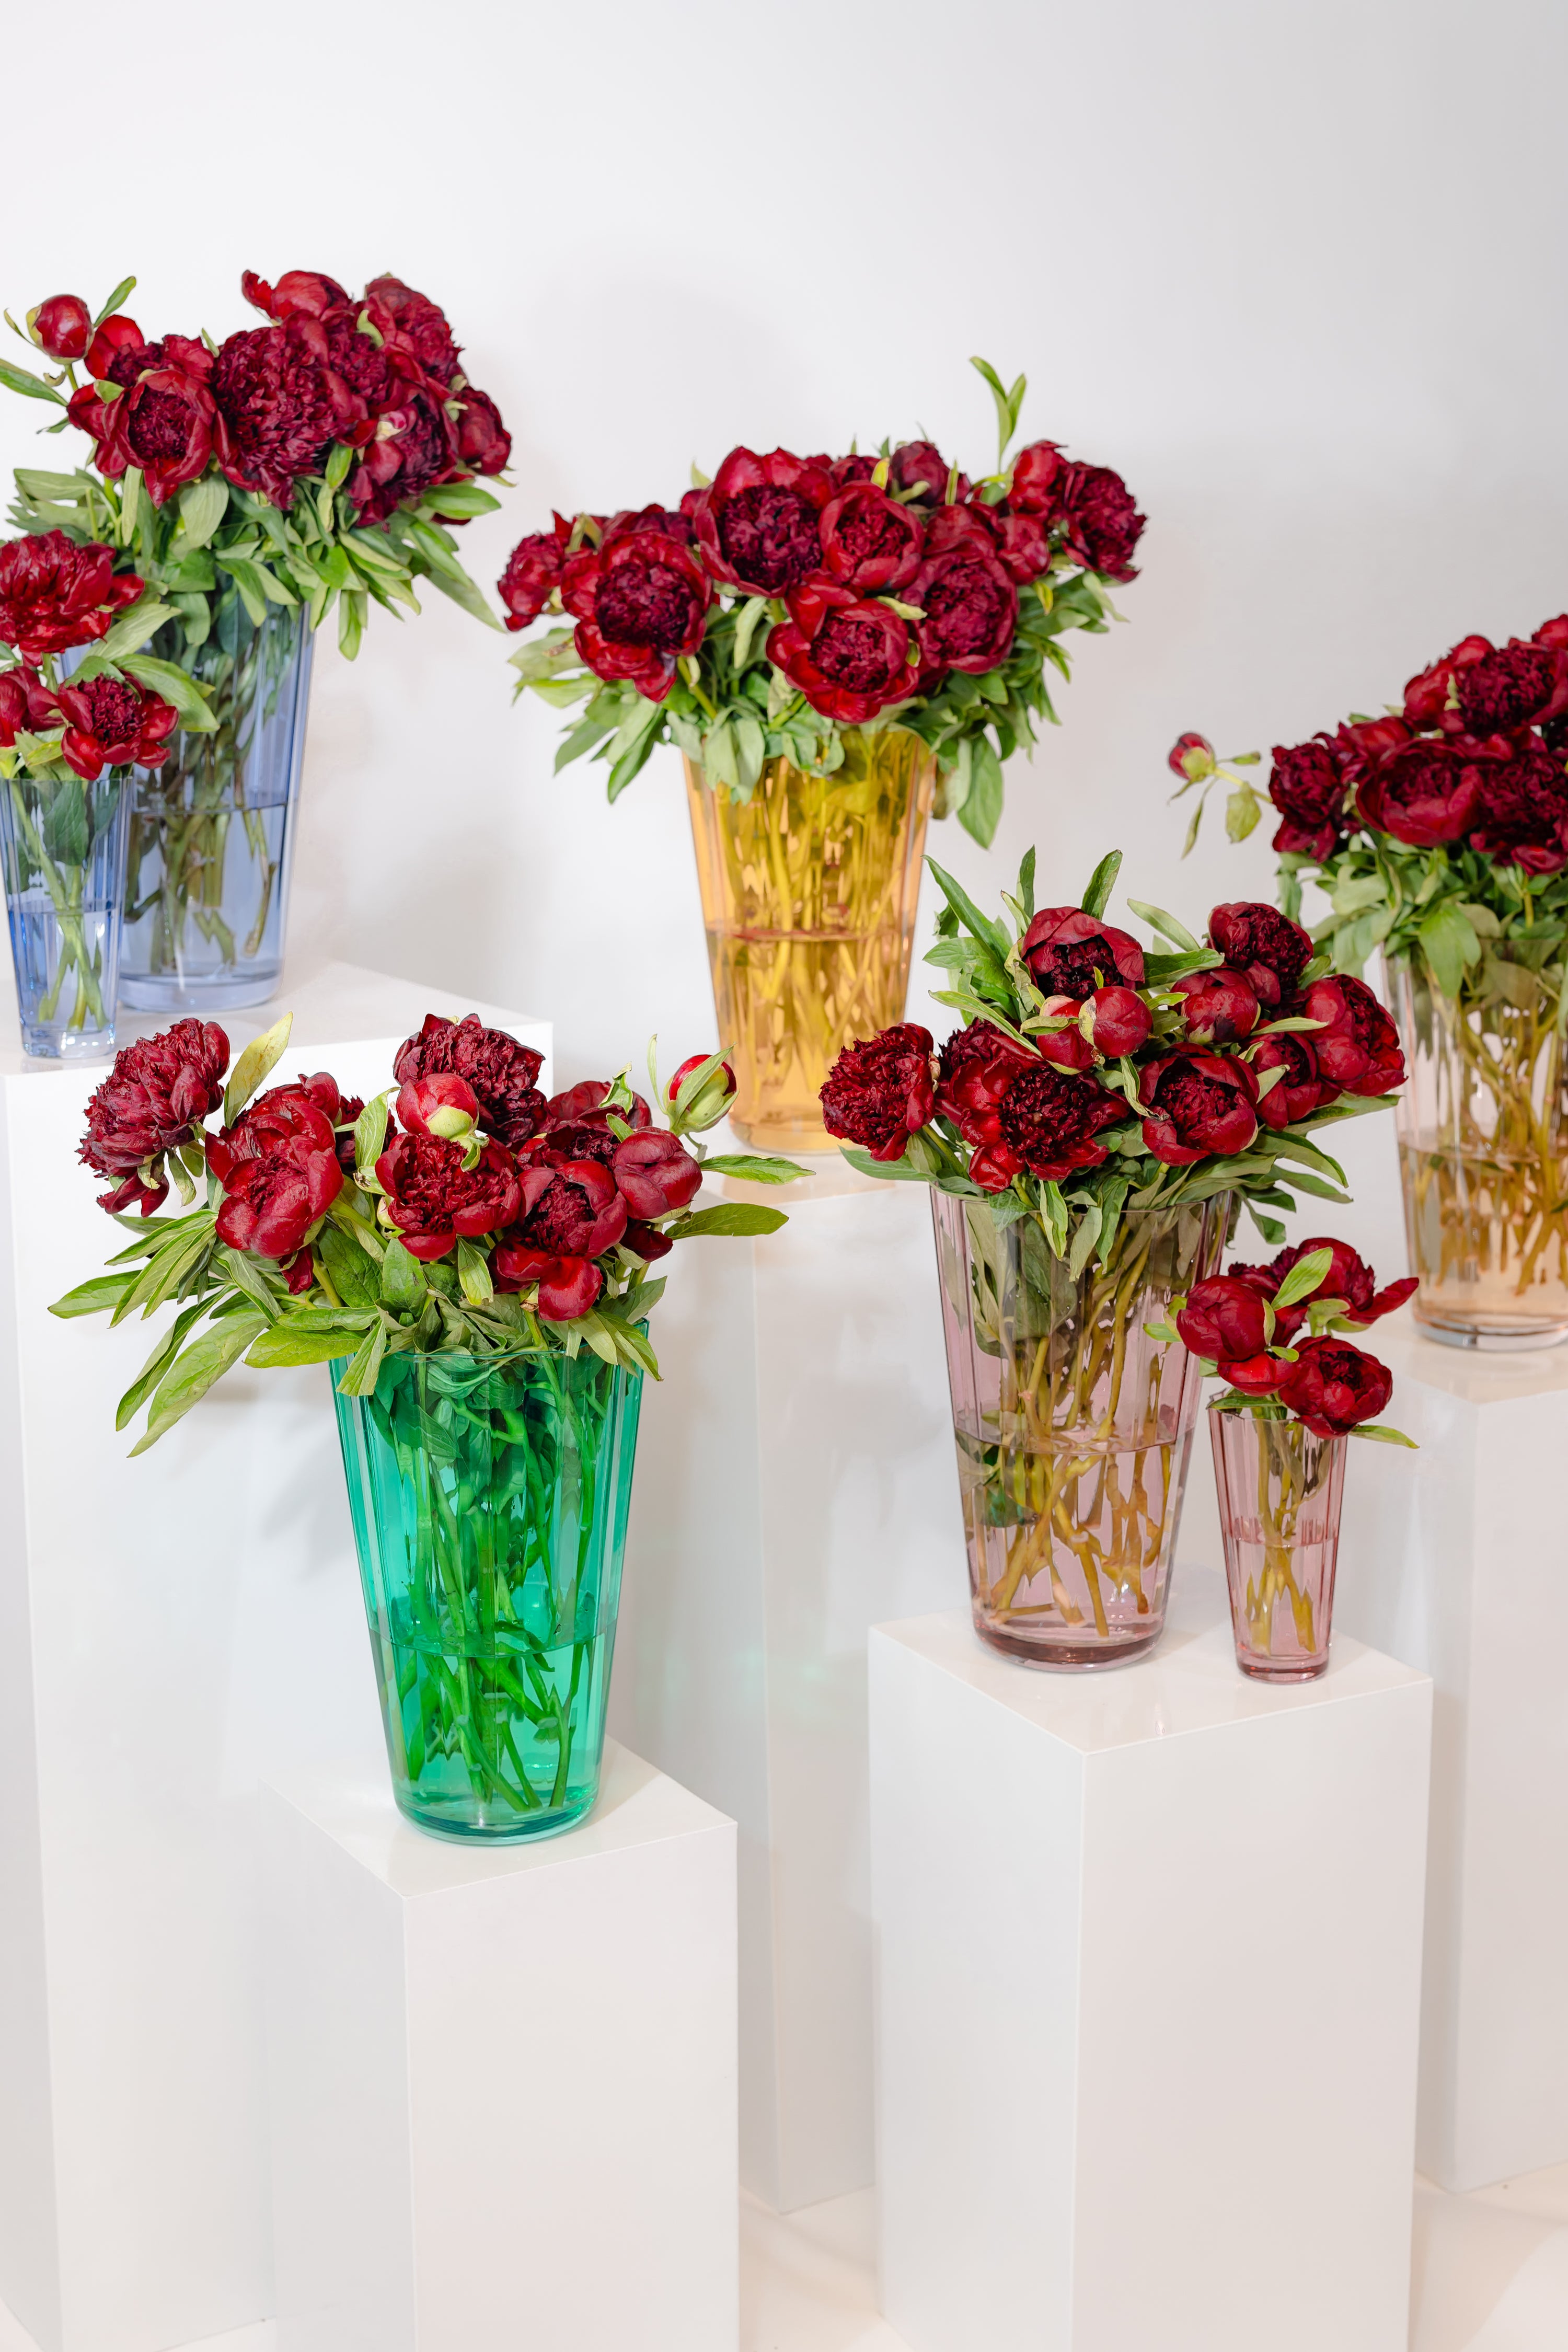 Brighten Your New Year with Estelle's Sunday Vases 💐